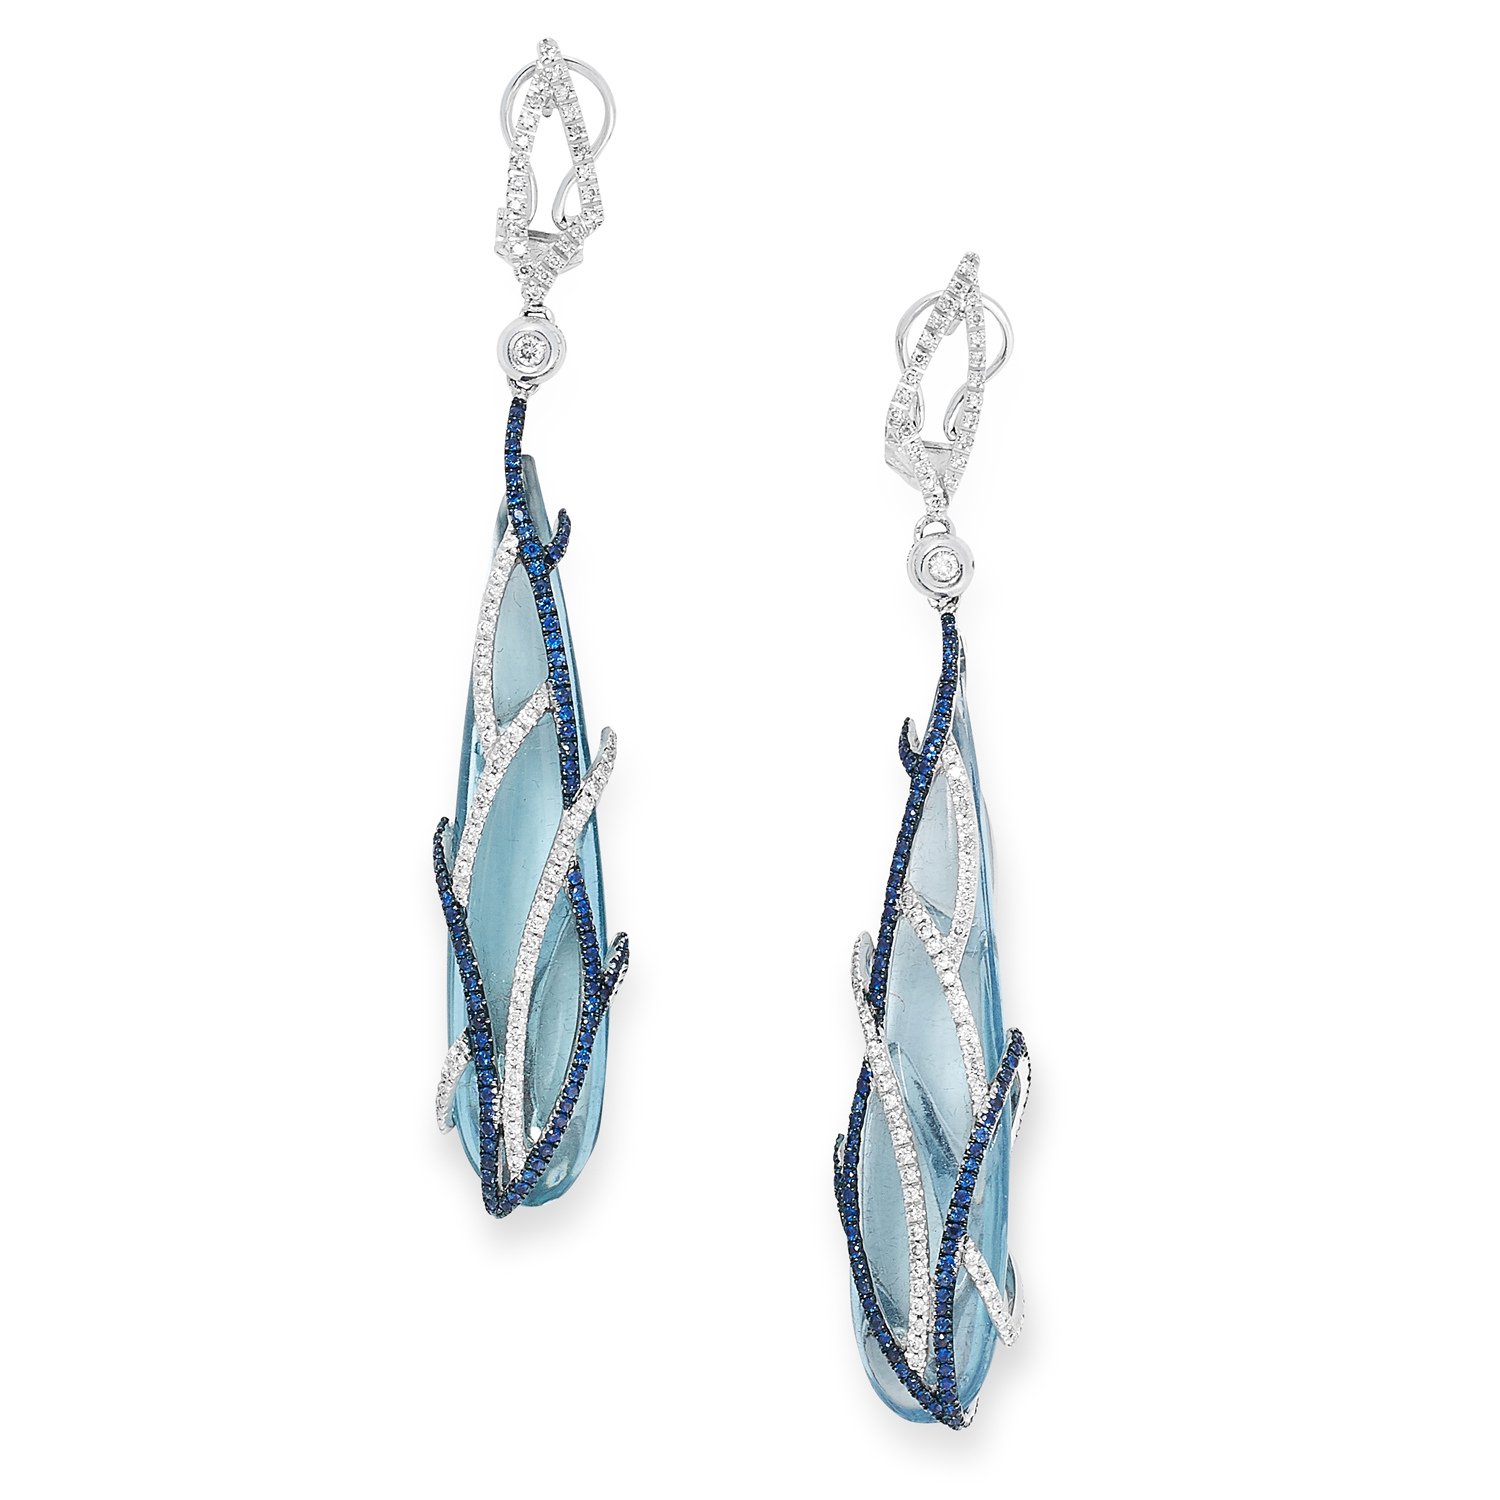 A PAIR OF DIAMOND, SAPPHIRE AND AQUAMARINE EARRINGS each comprising of a polished aquamarine drop